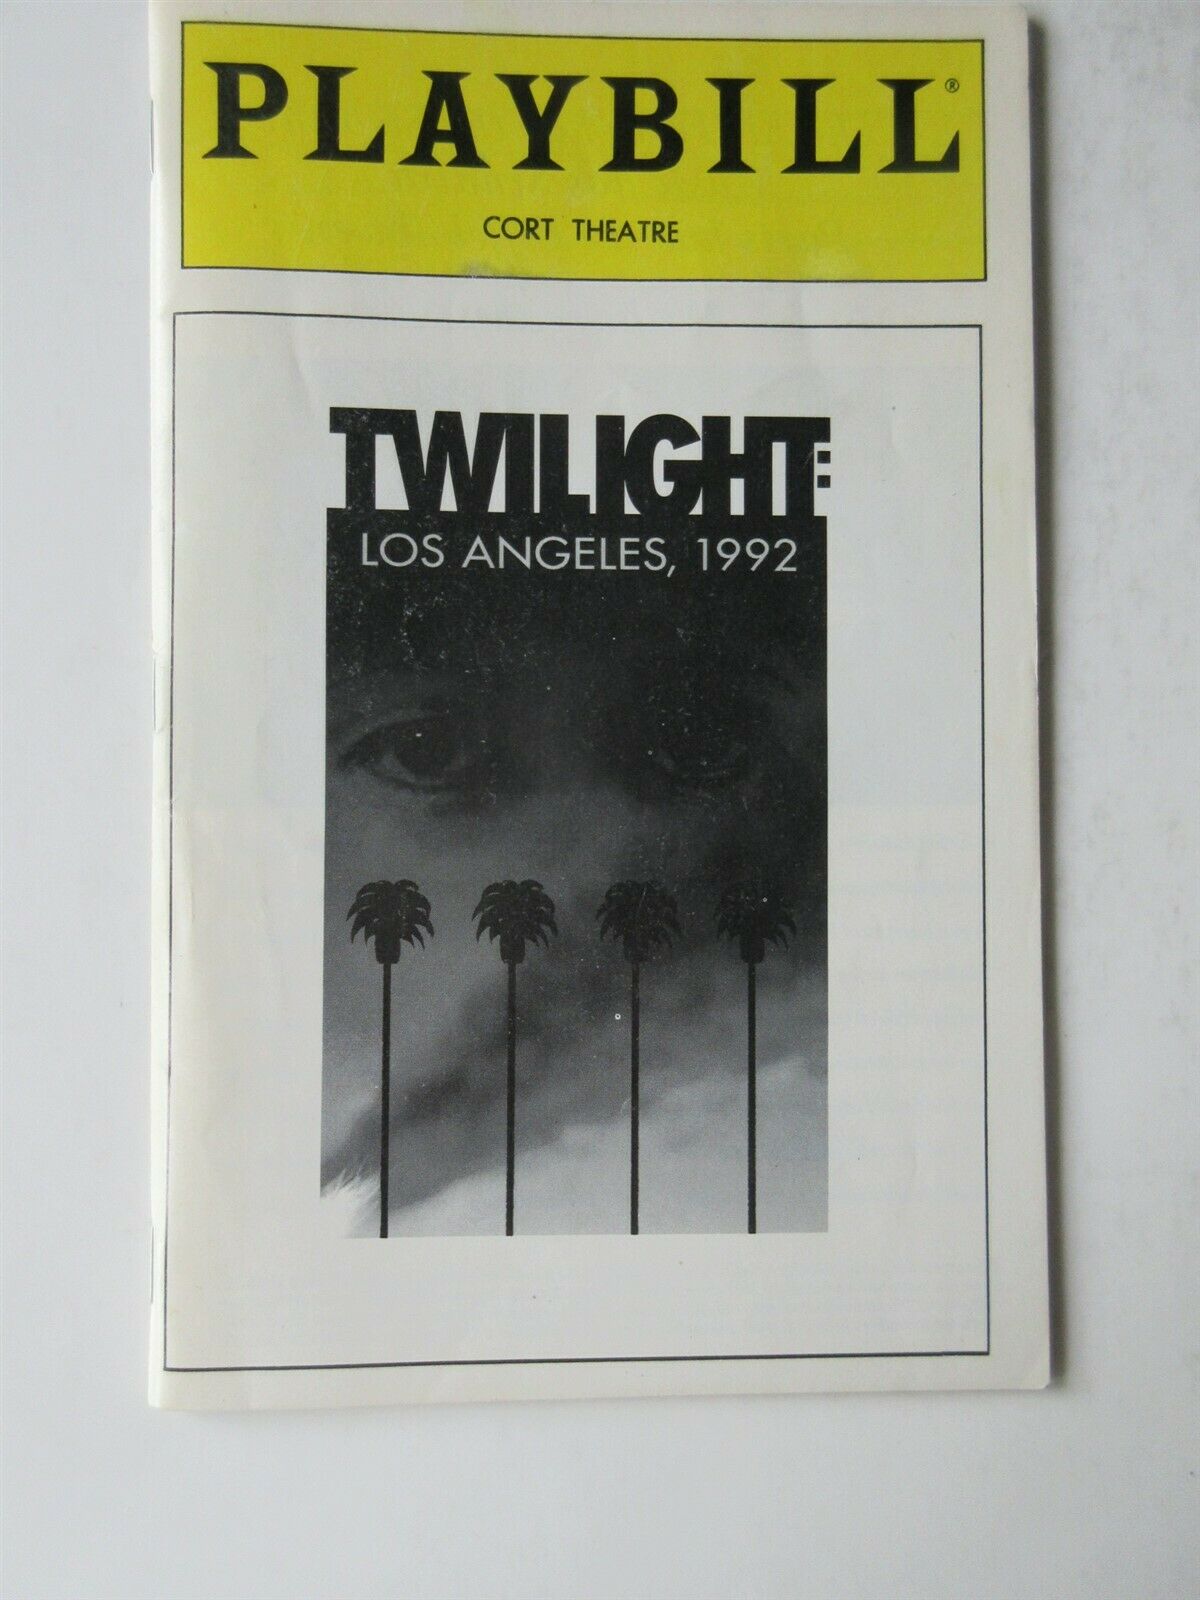 1994 Playbill Twilight: Los Angeles, 1992 By George Wolfe At Cort Theatre